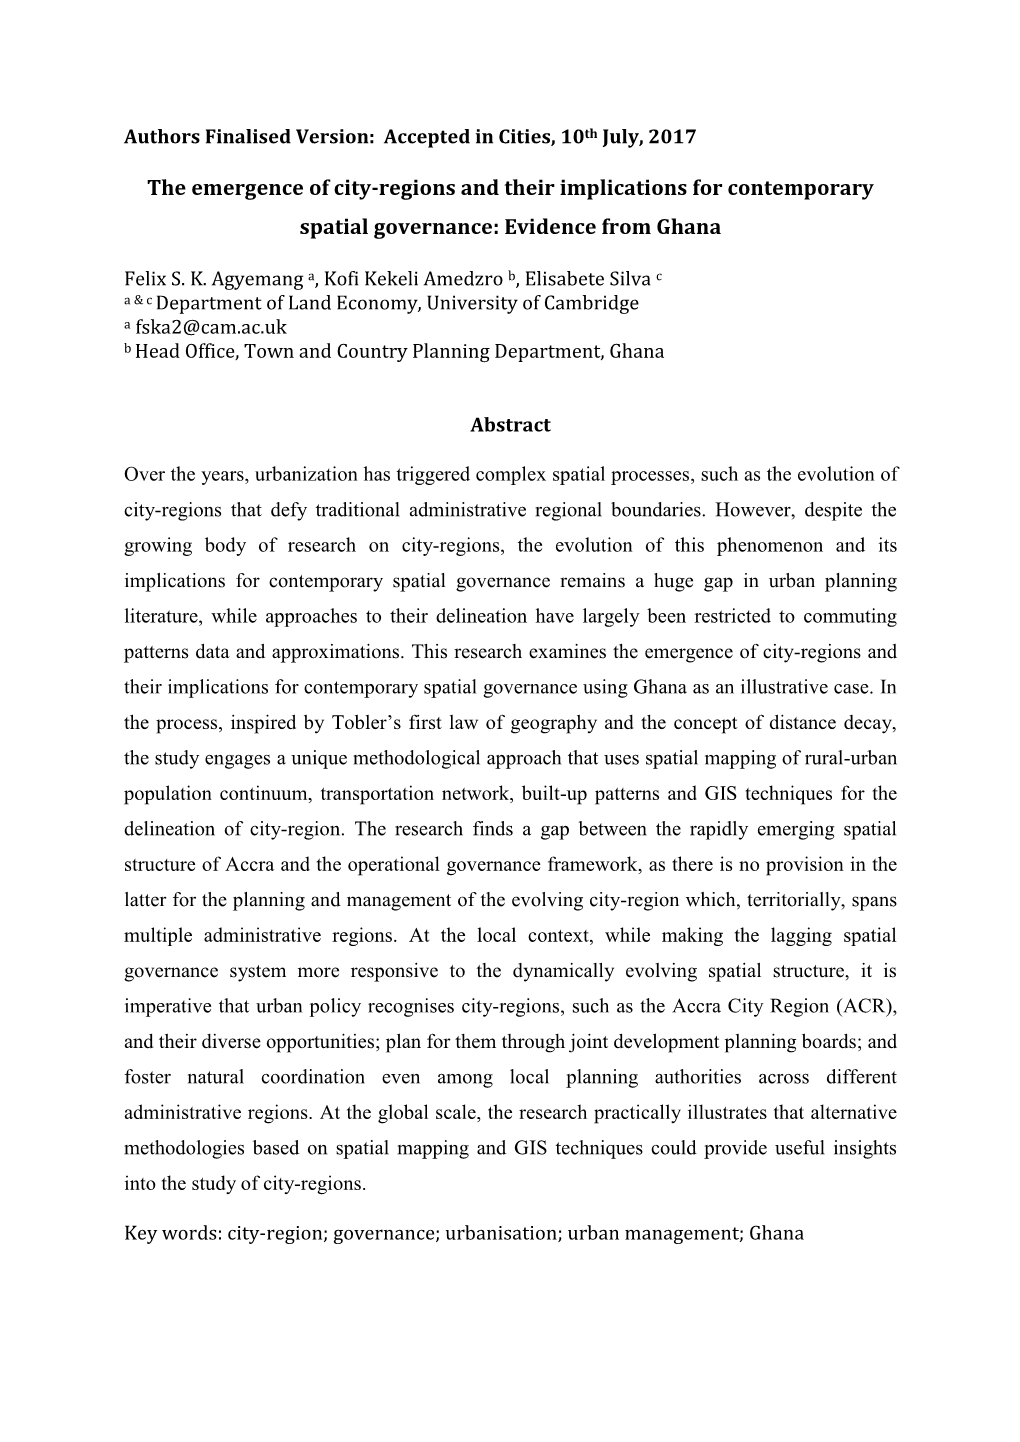 The Emergence of City-Regions and Their Implications for Contemporary Spatial Governance: Evidence from Ghana